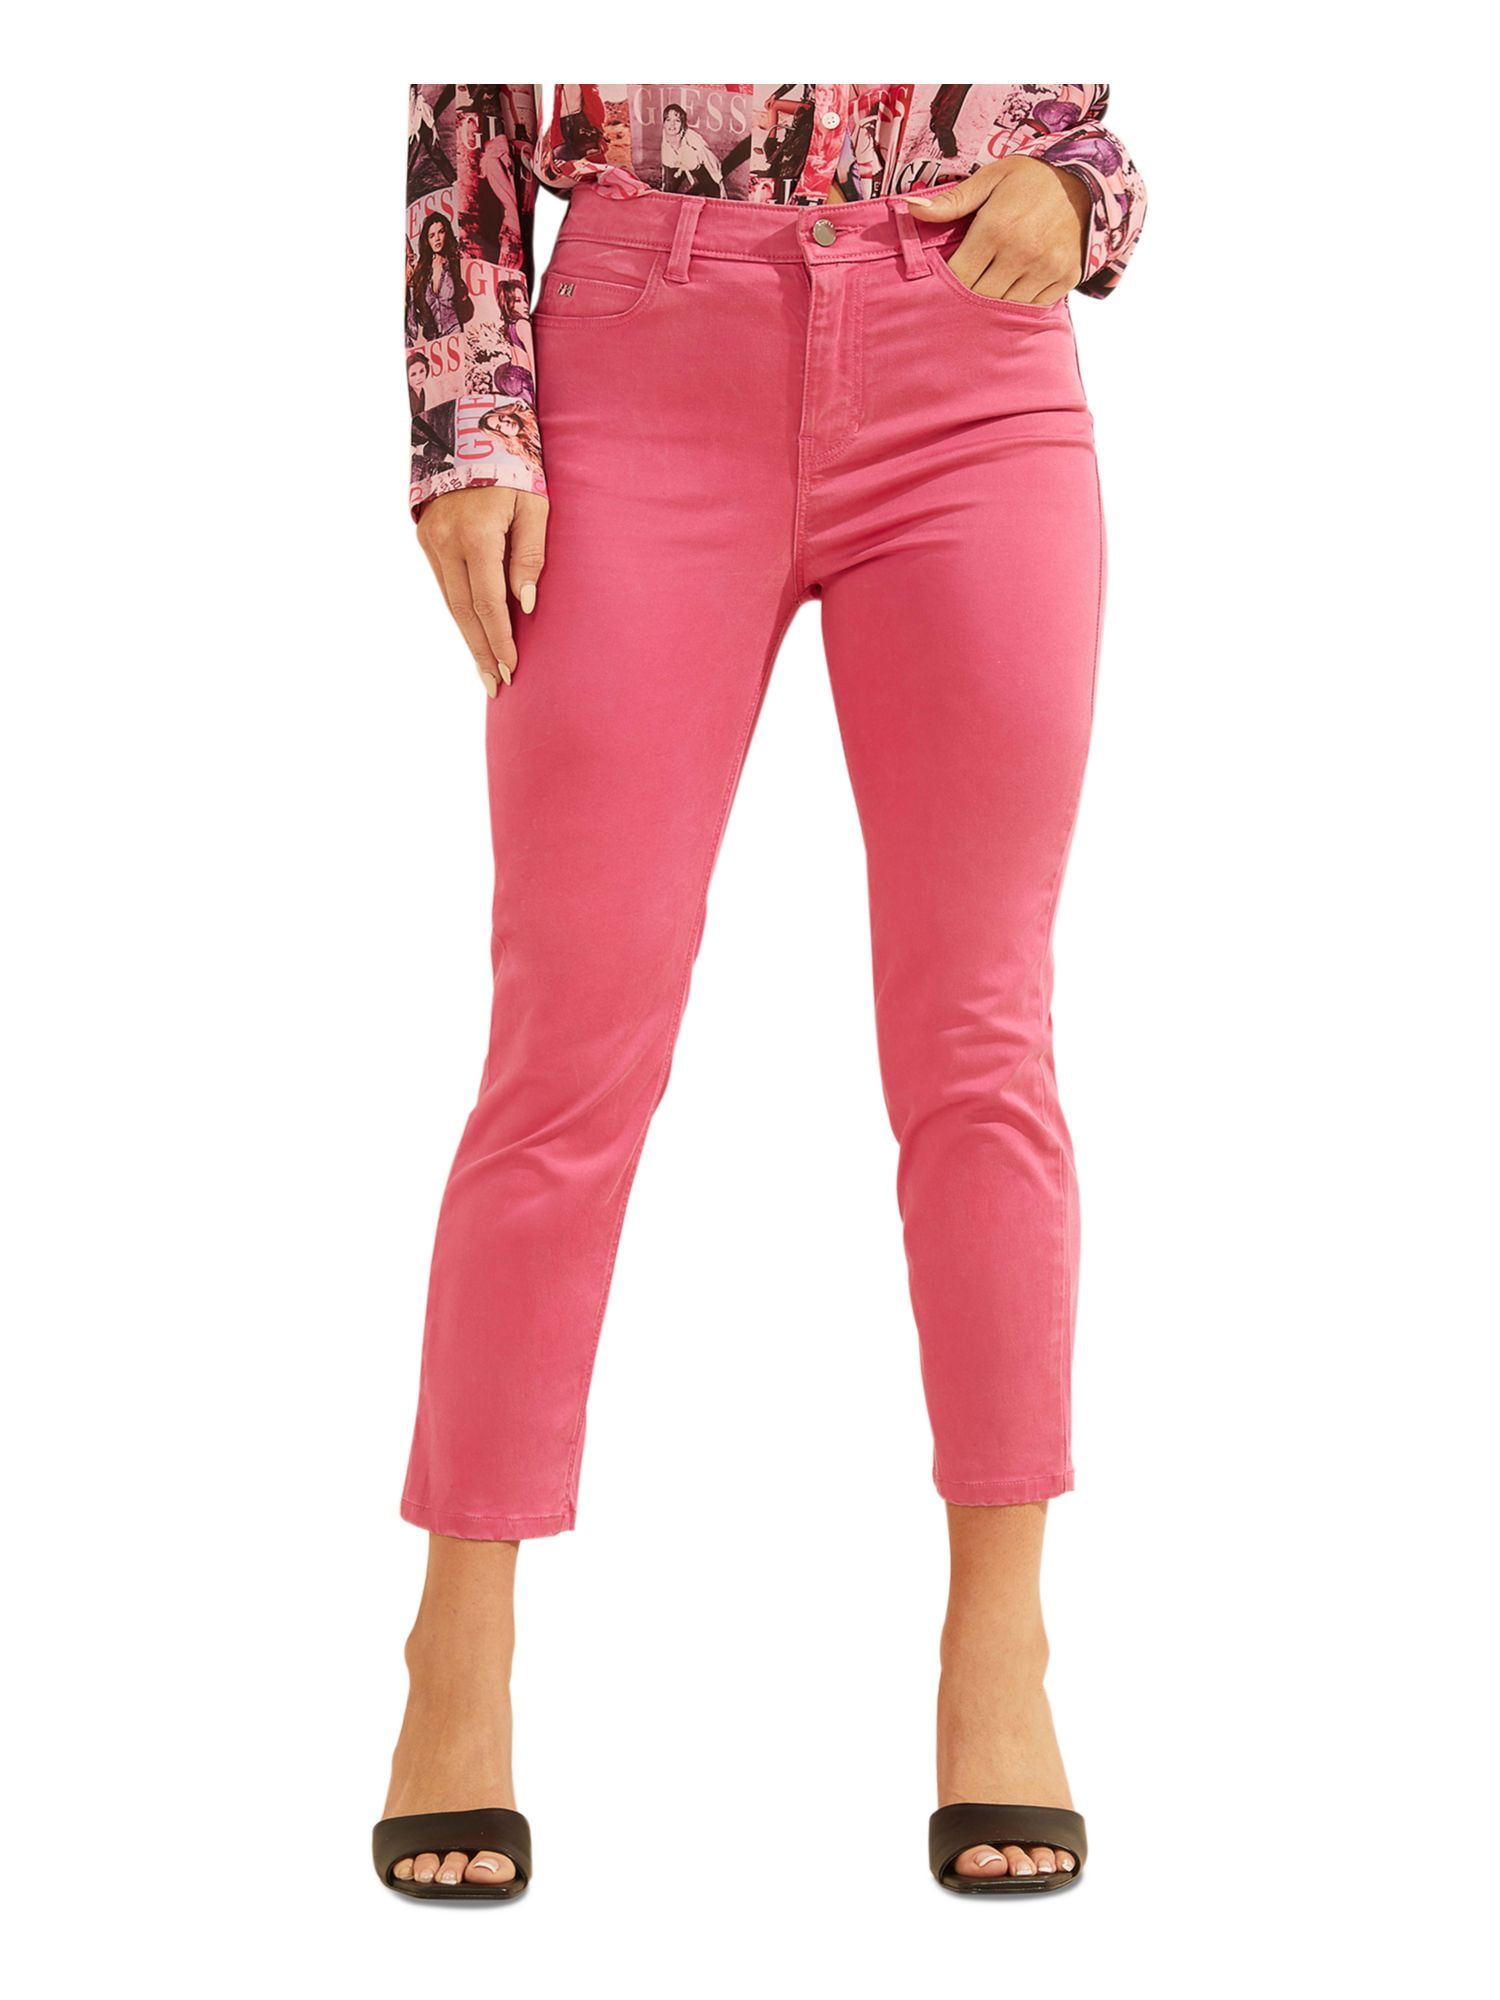 Plus Size Edgy Pink Destructed Stretchy High Waist Skinny Jeans